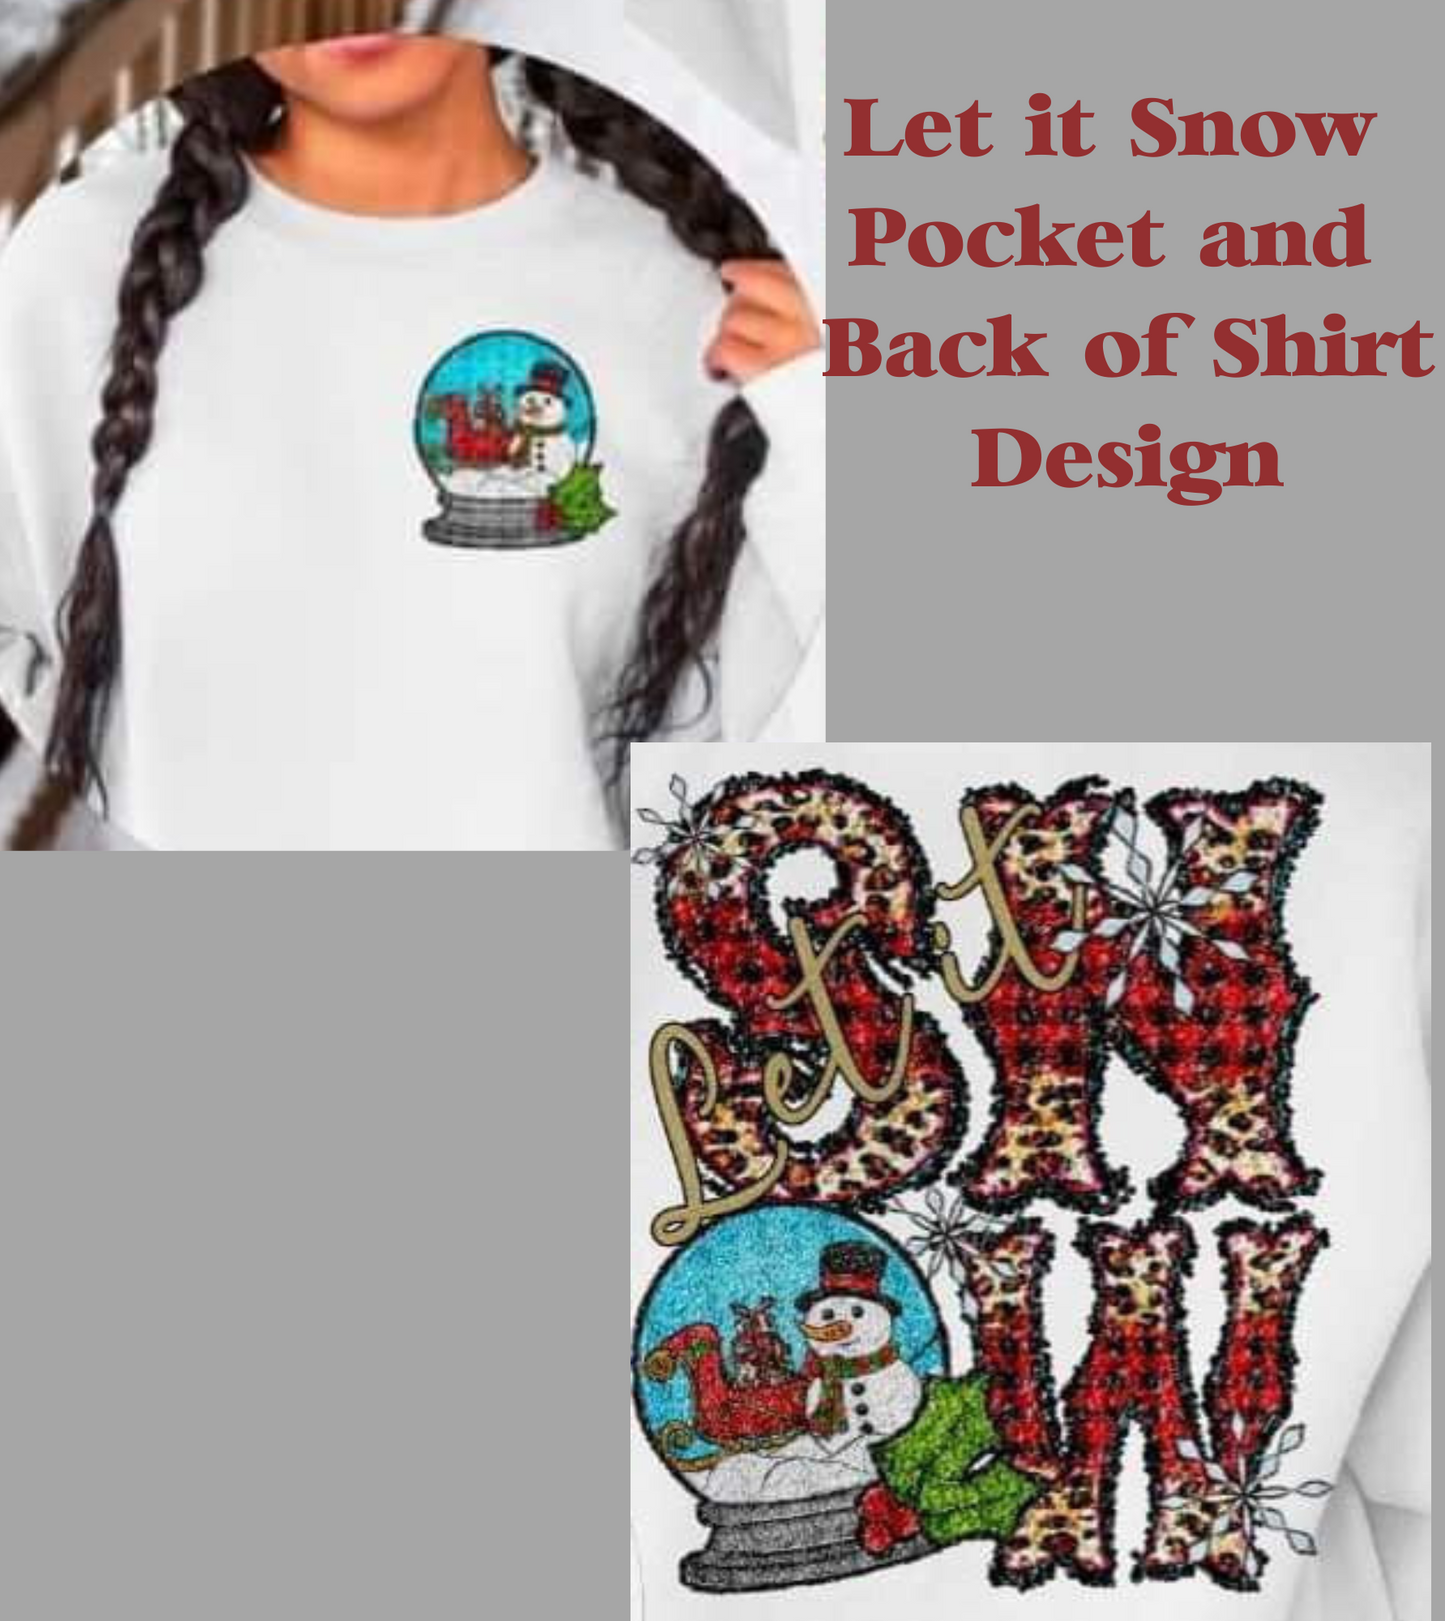 Let it Snow with Snow Globe Front/Back Design